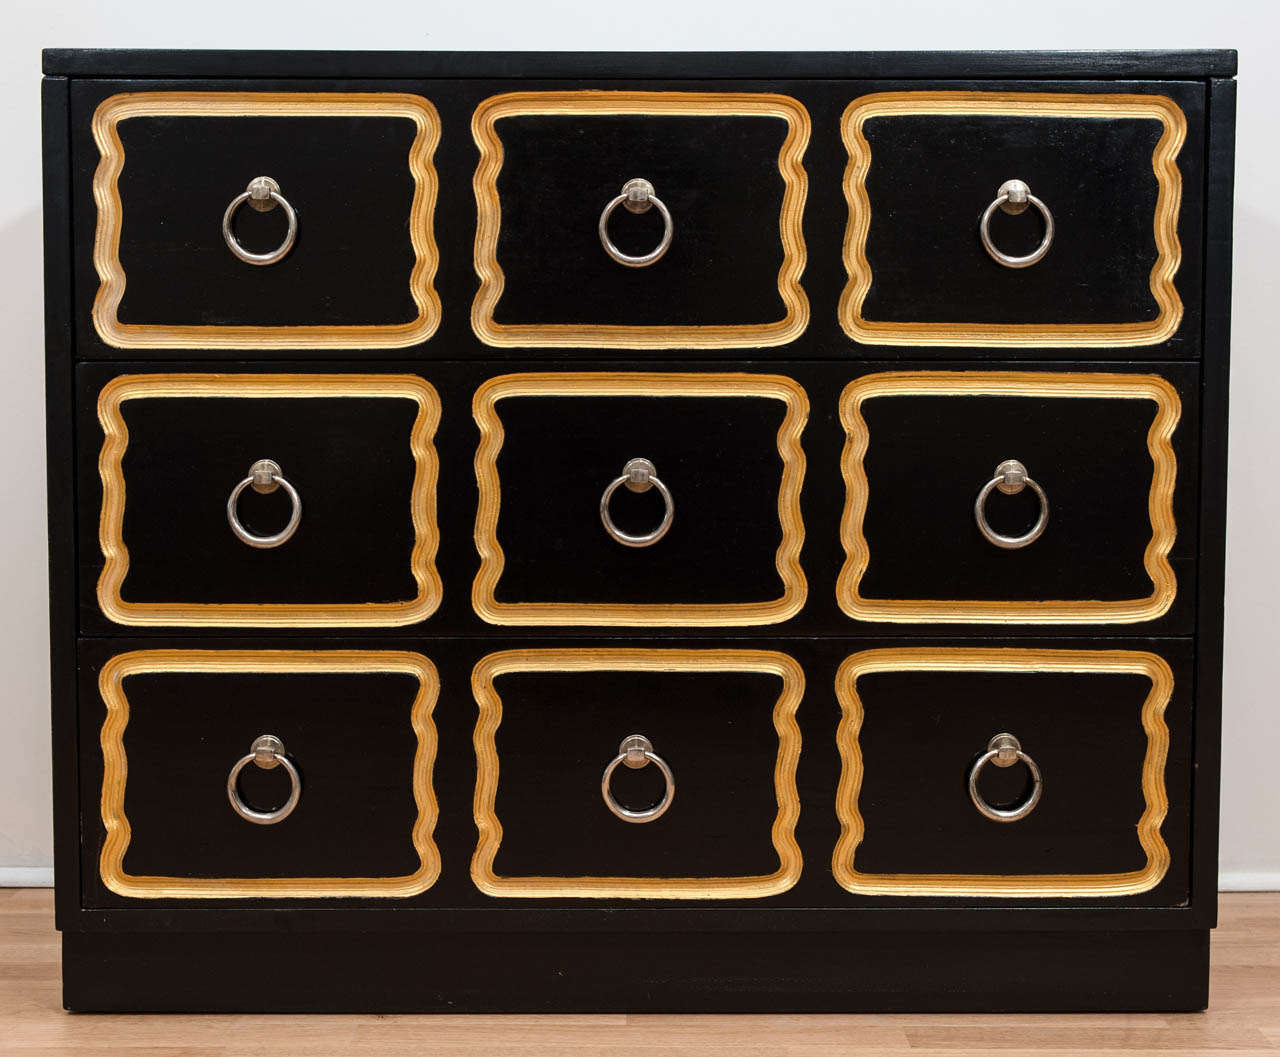 An iconic and glamorous chest of drawers that is as hip
and current today as it was when it was
first produced. Classic black with gold trim.